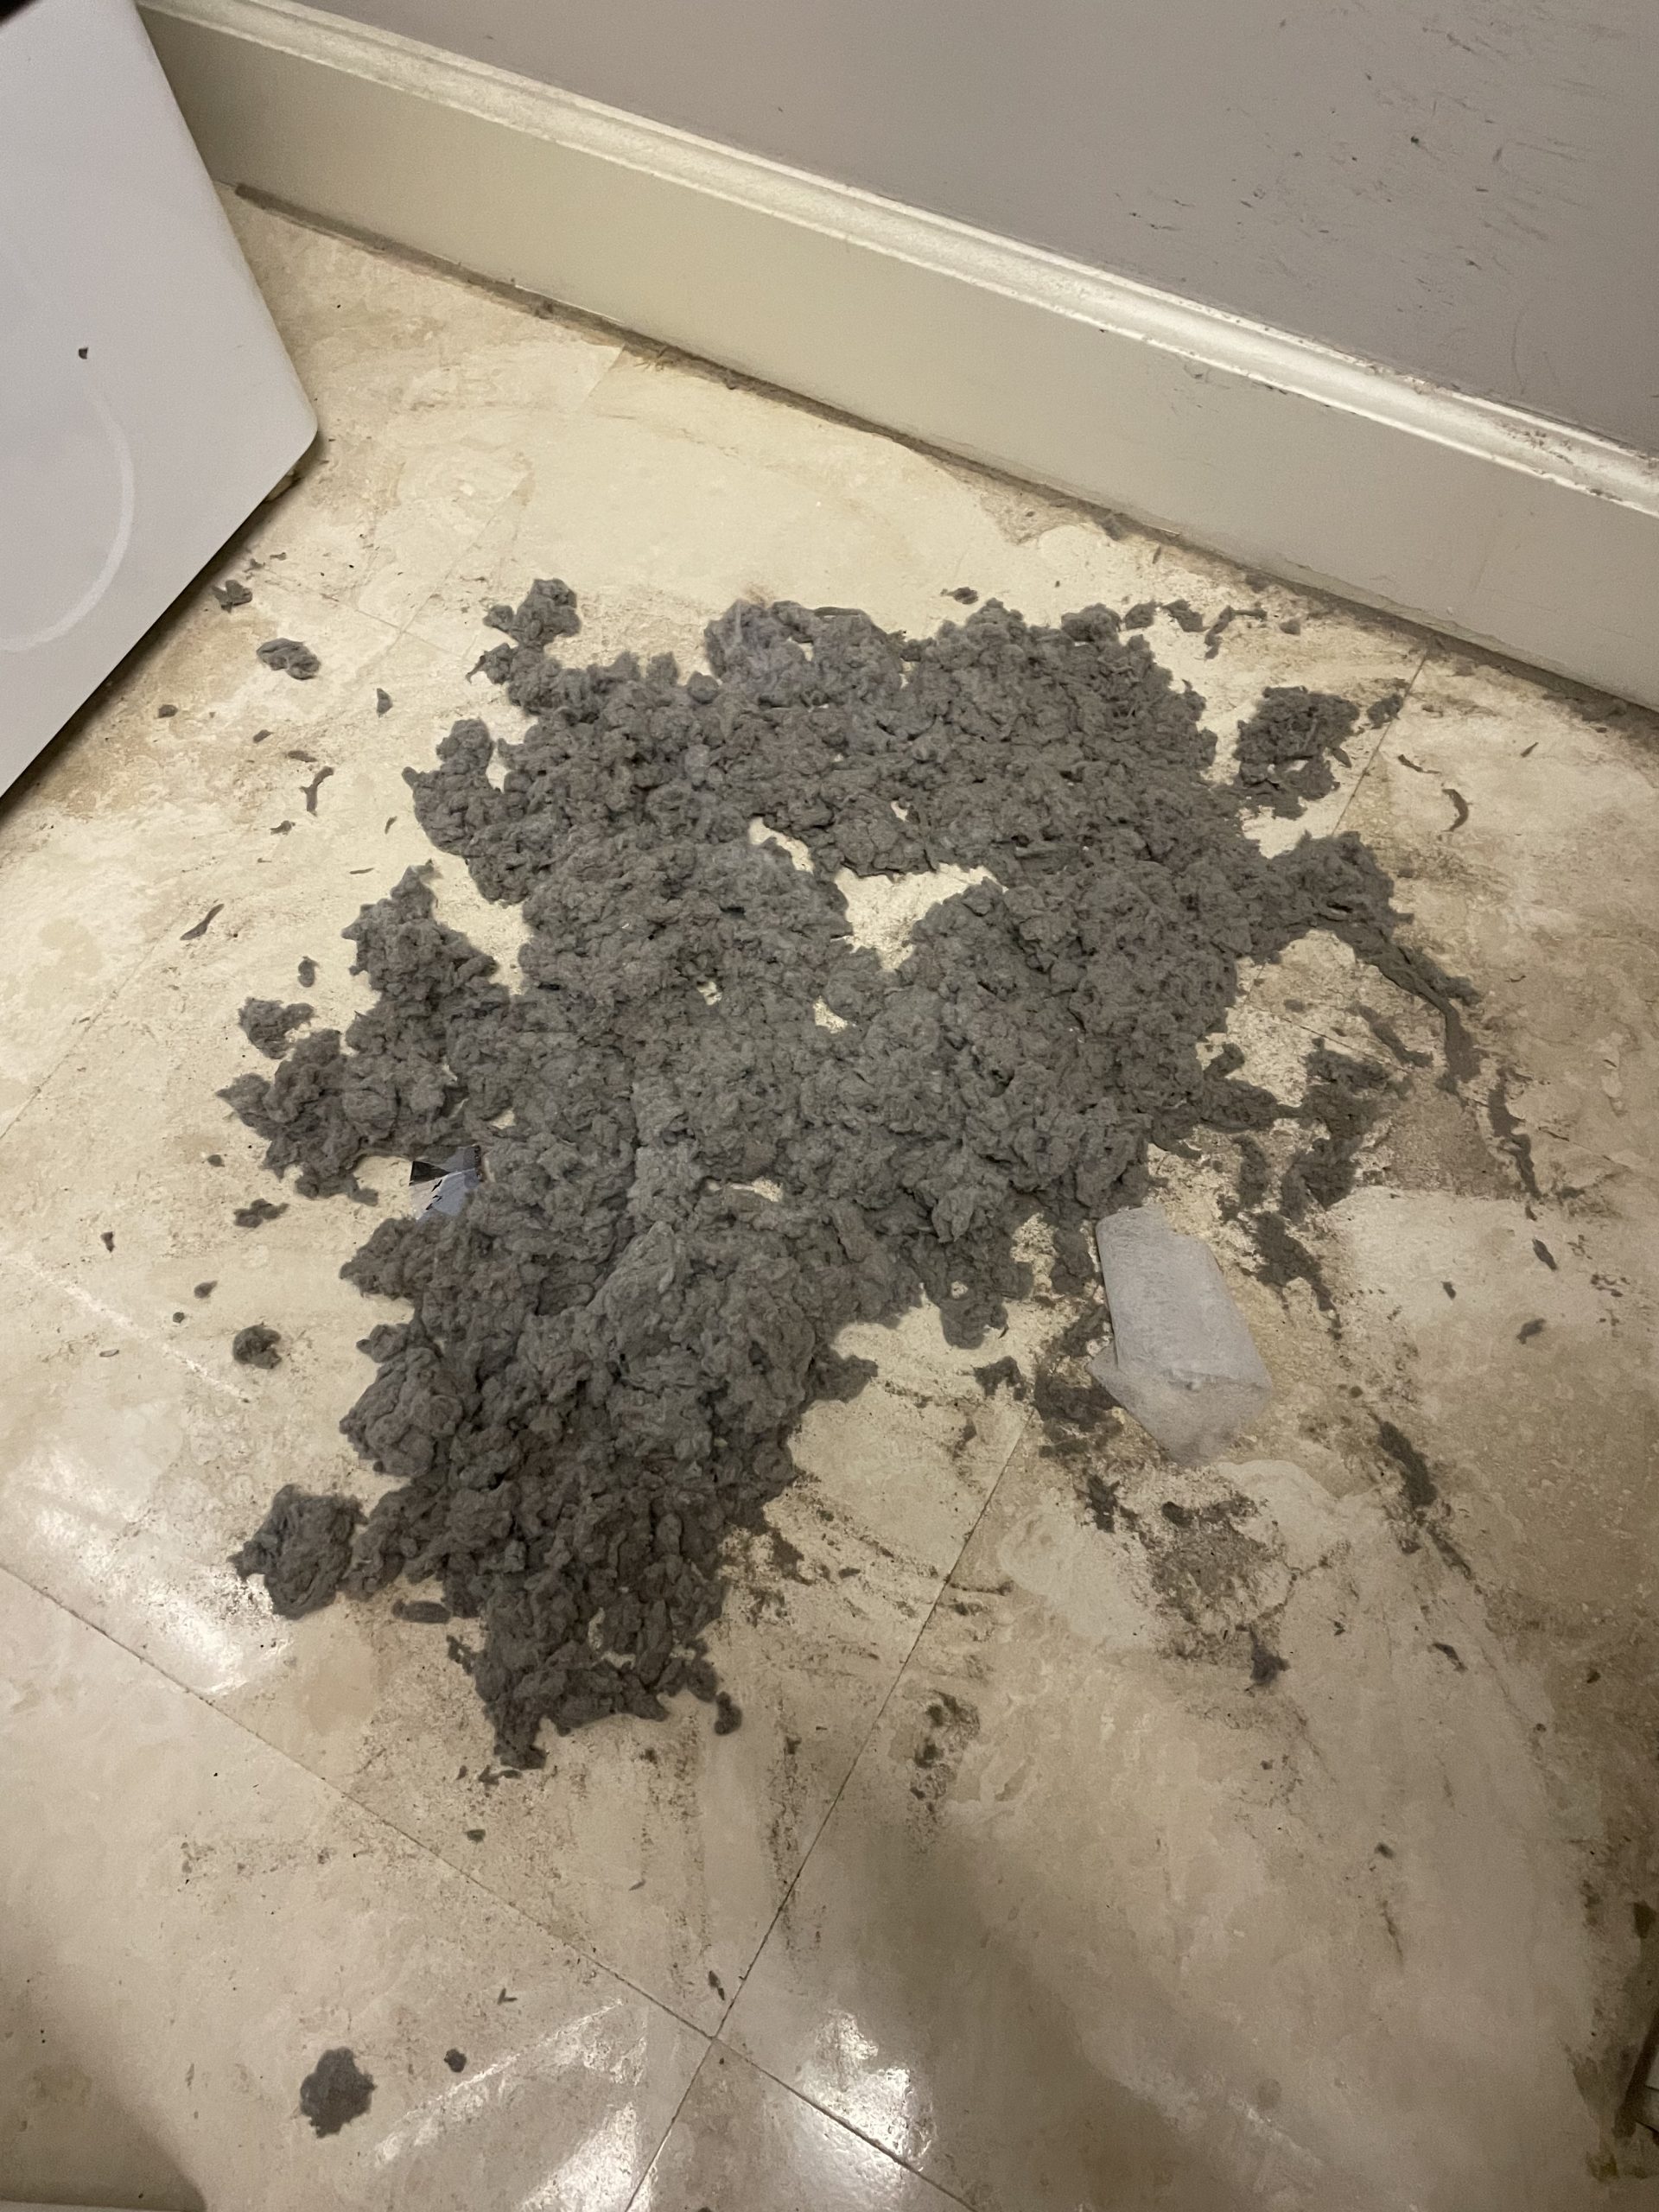 Okatie SC dryer vent cleaning services